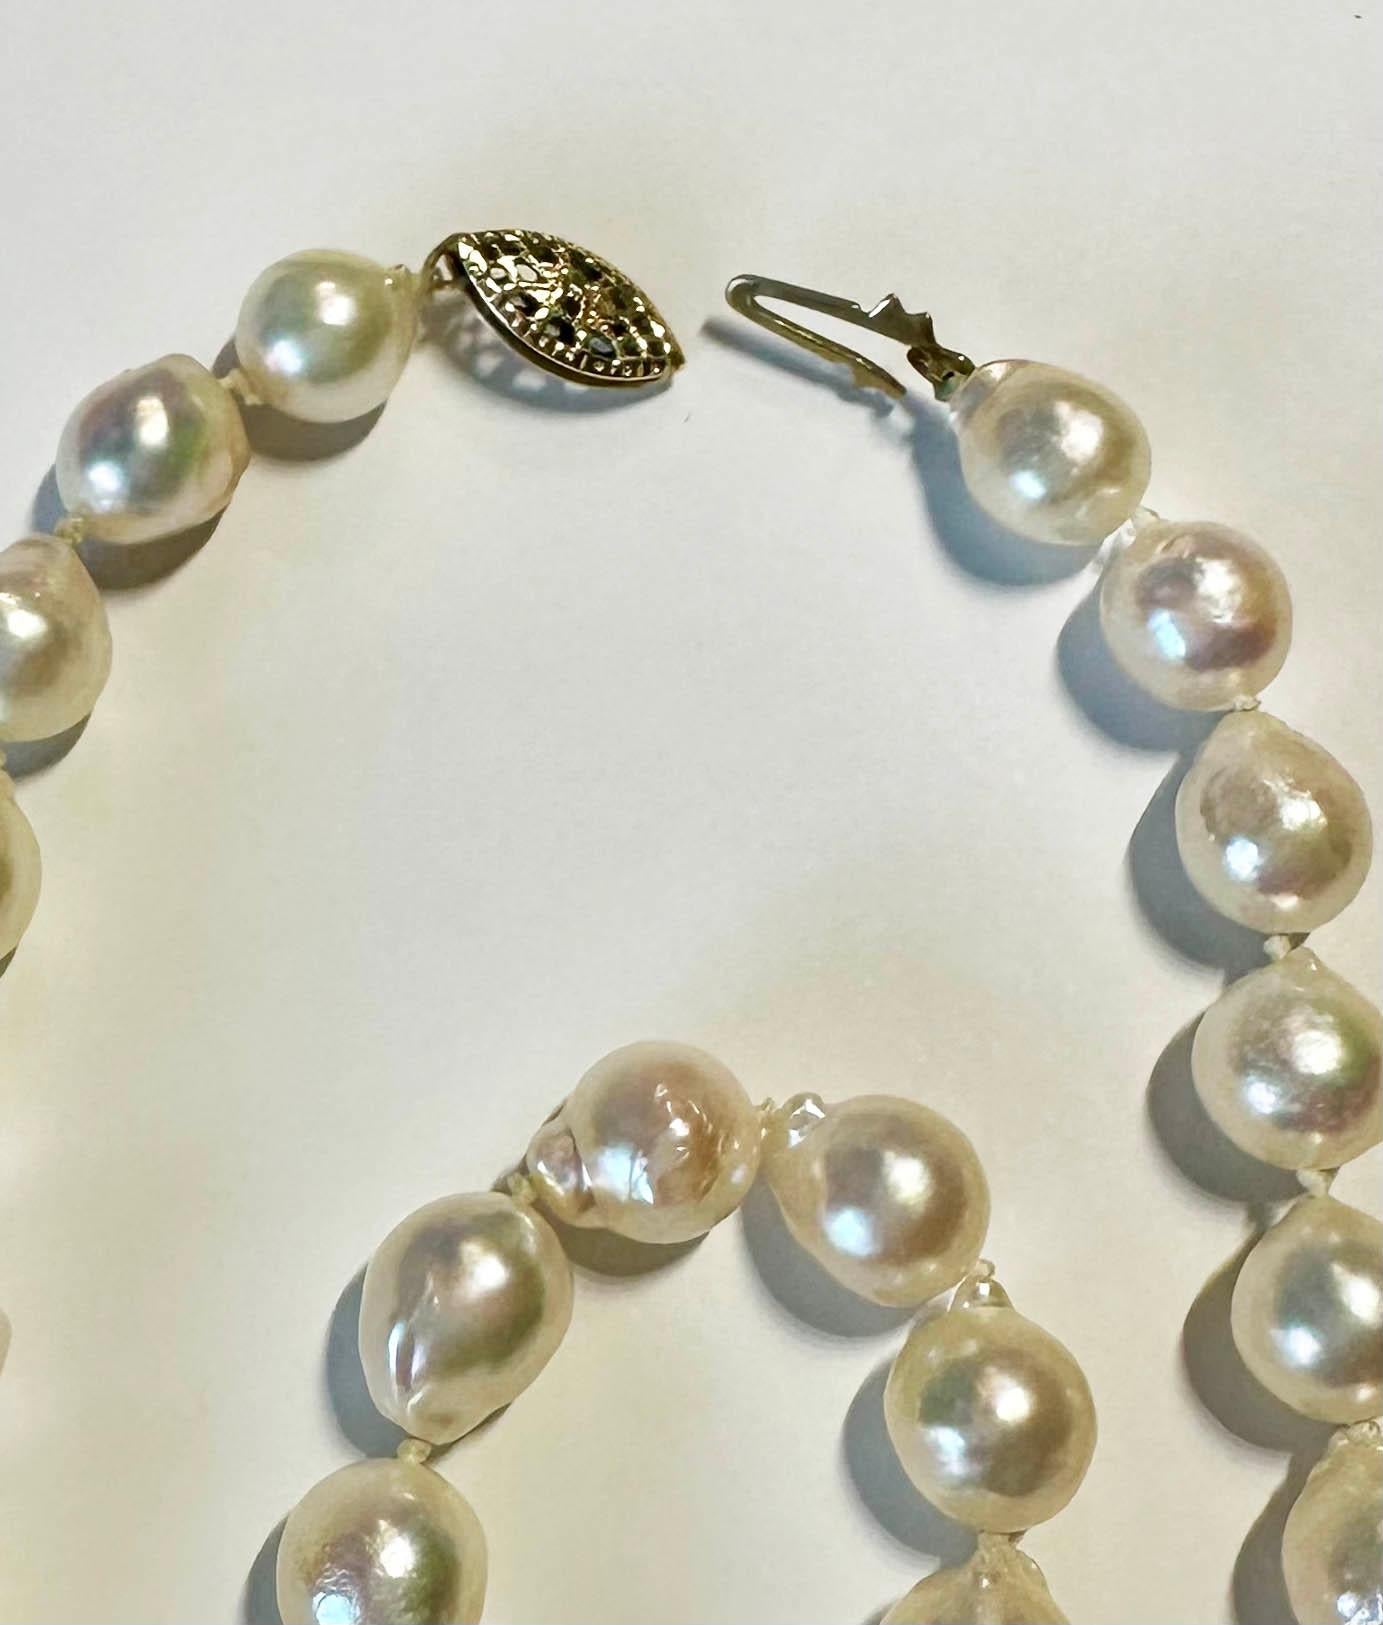 Women's A Pearl Necklace and Bracelet set of Cultured Salt Water Pearls. For Sale